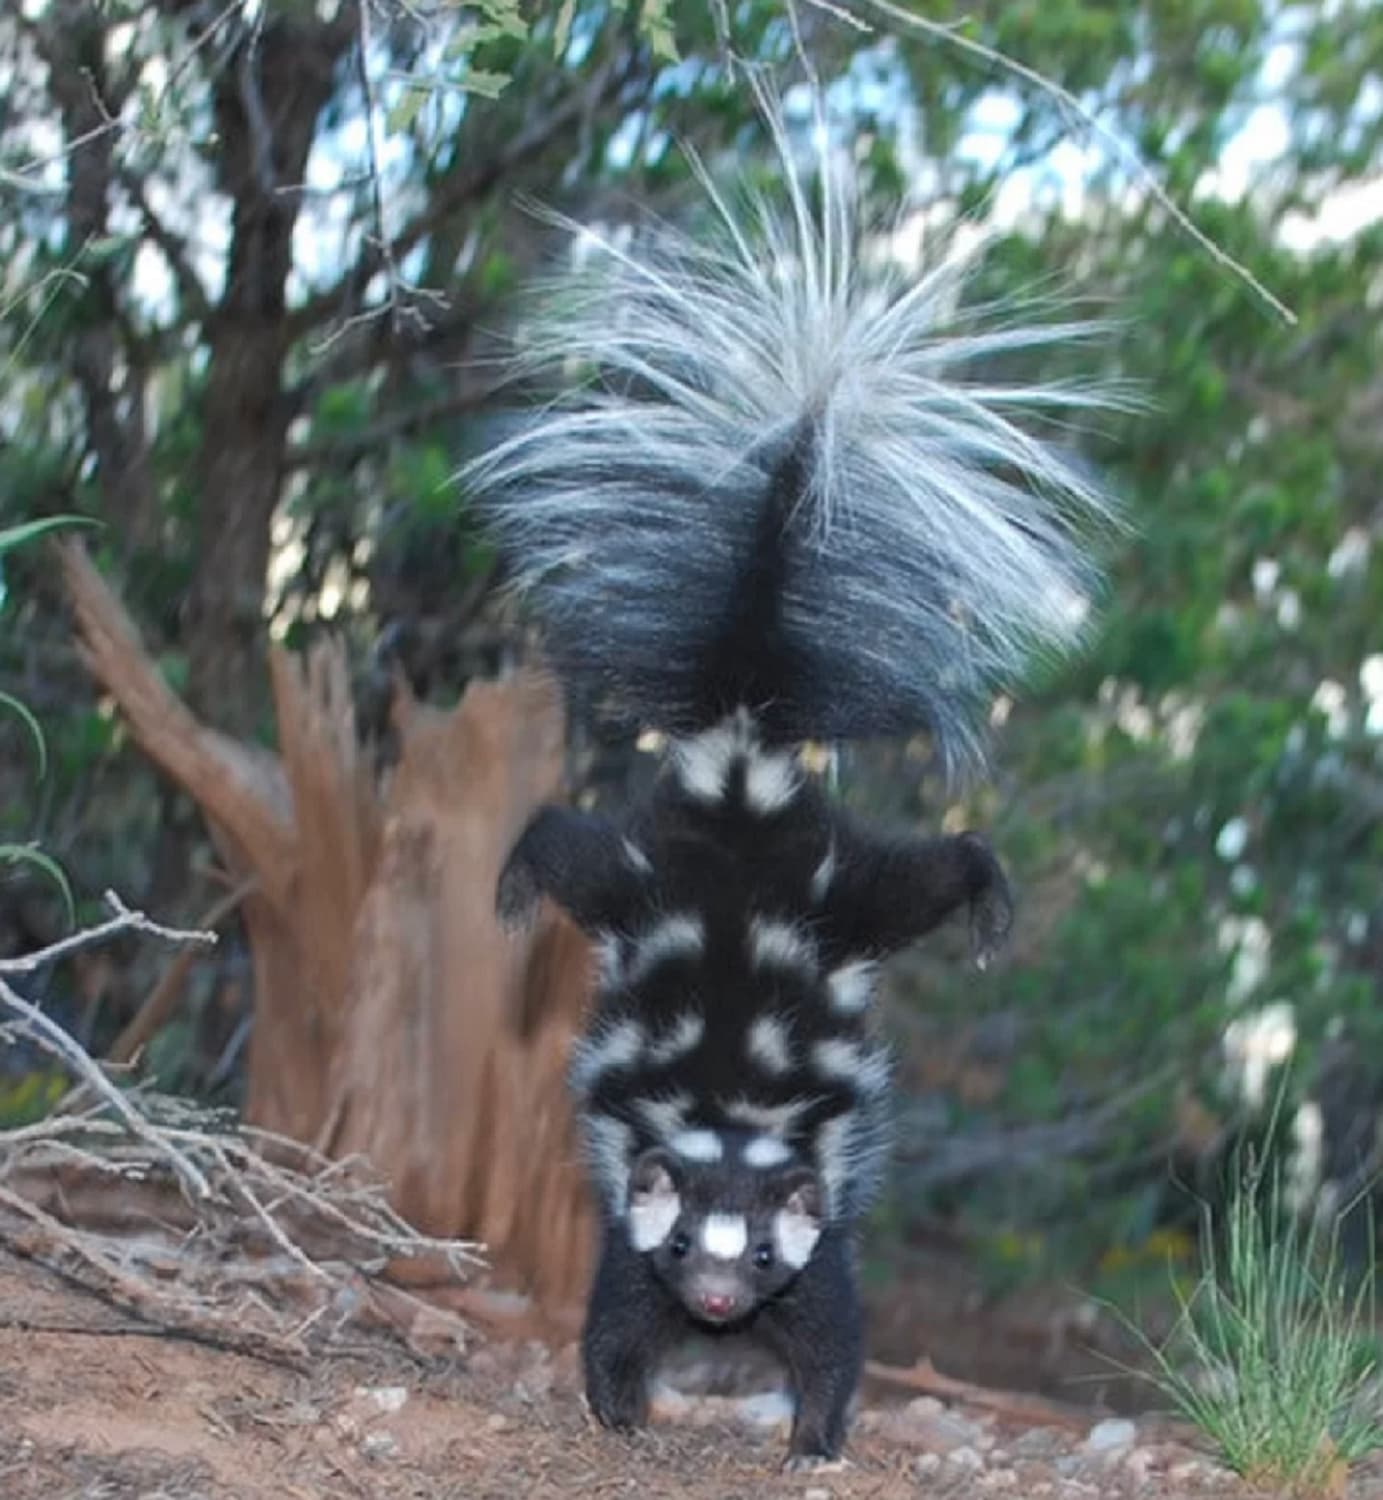 This adorable little stinker is the spotted skunk. It is a medium-sized omnivores in the weasel family that is mostly nocturnal. It is unique in that when threatened, it does a handstand, hind feet up & fluffy tail in the air, facing towards as it spray its foul-smelling musk to ward off predators.